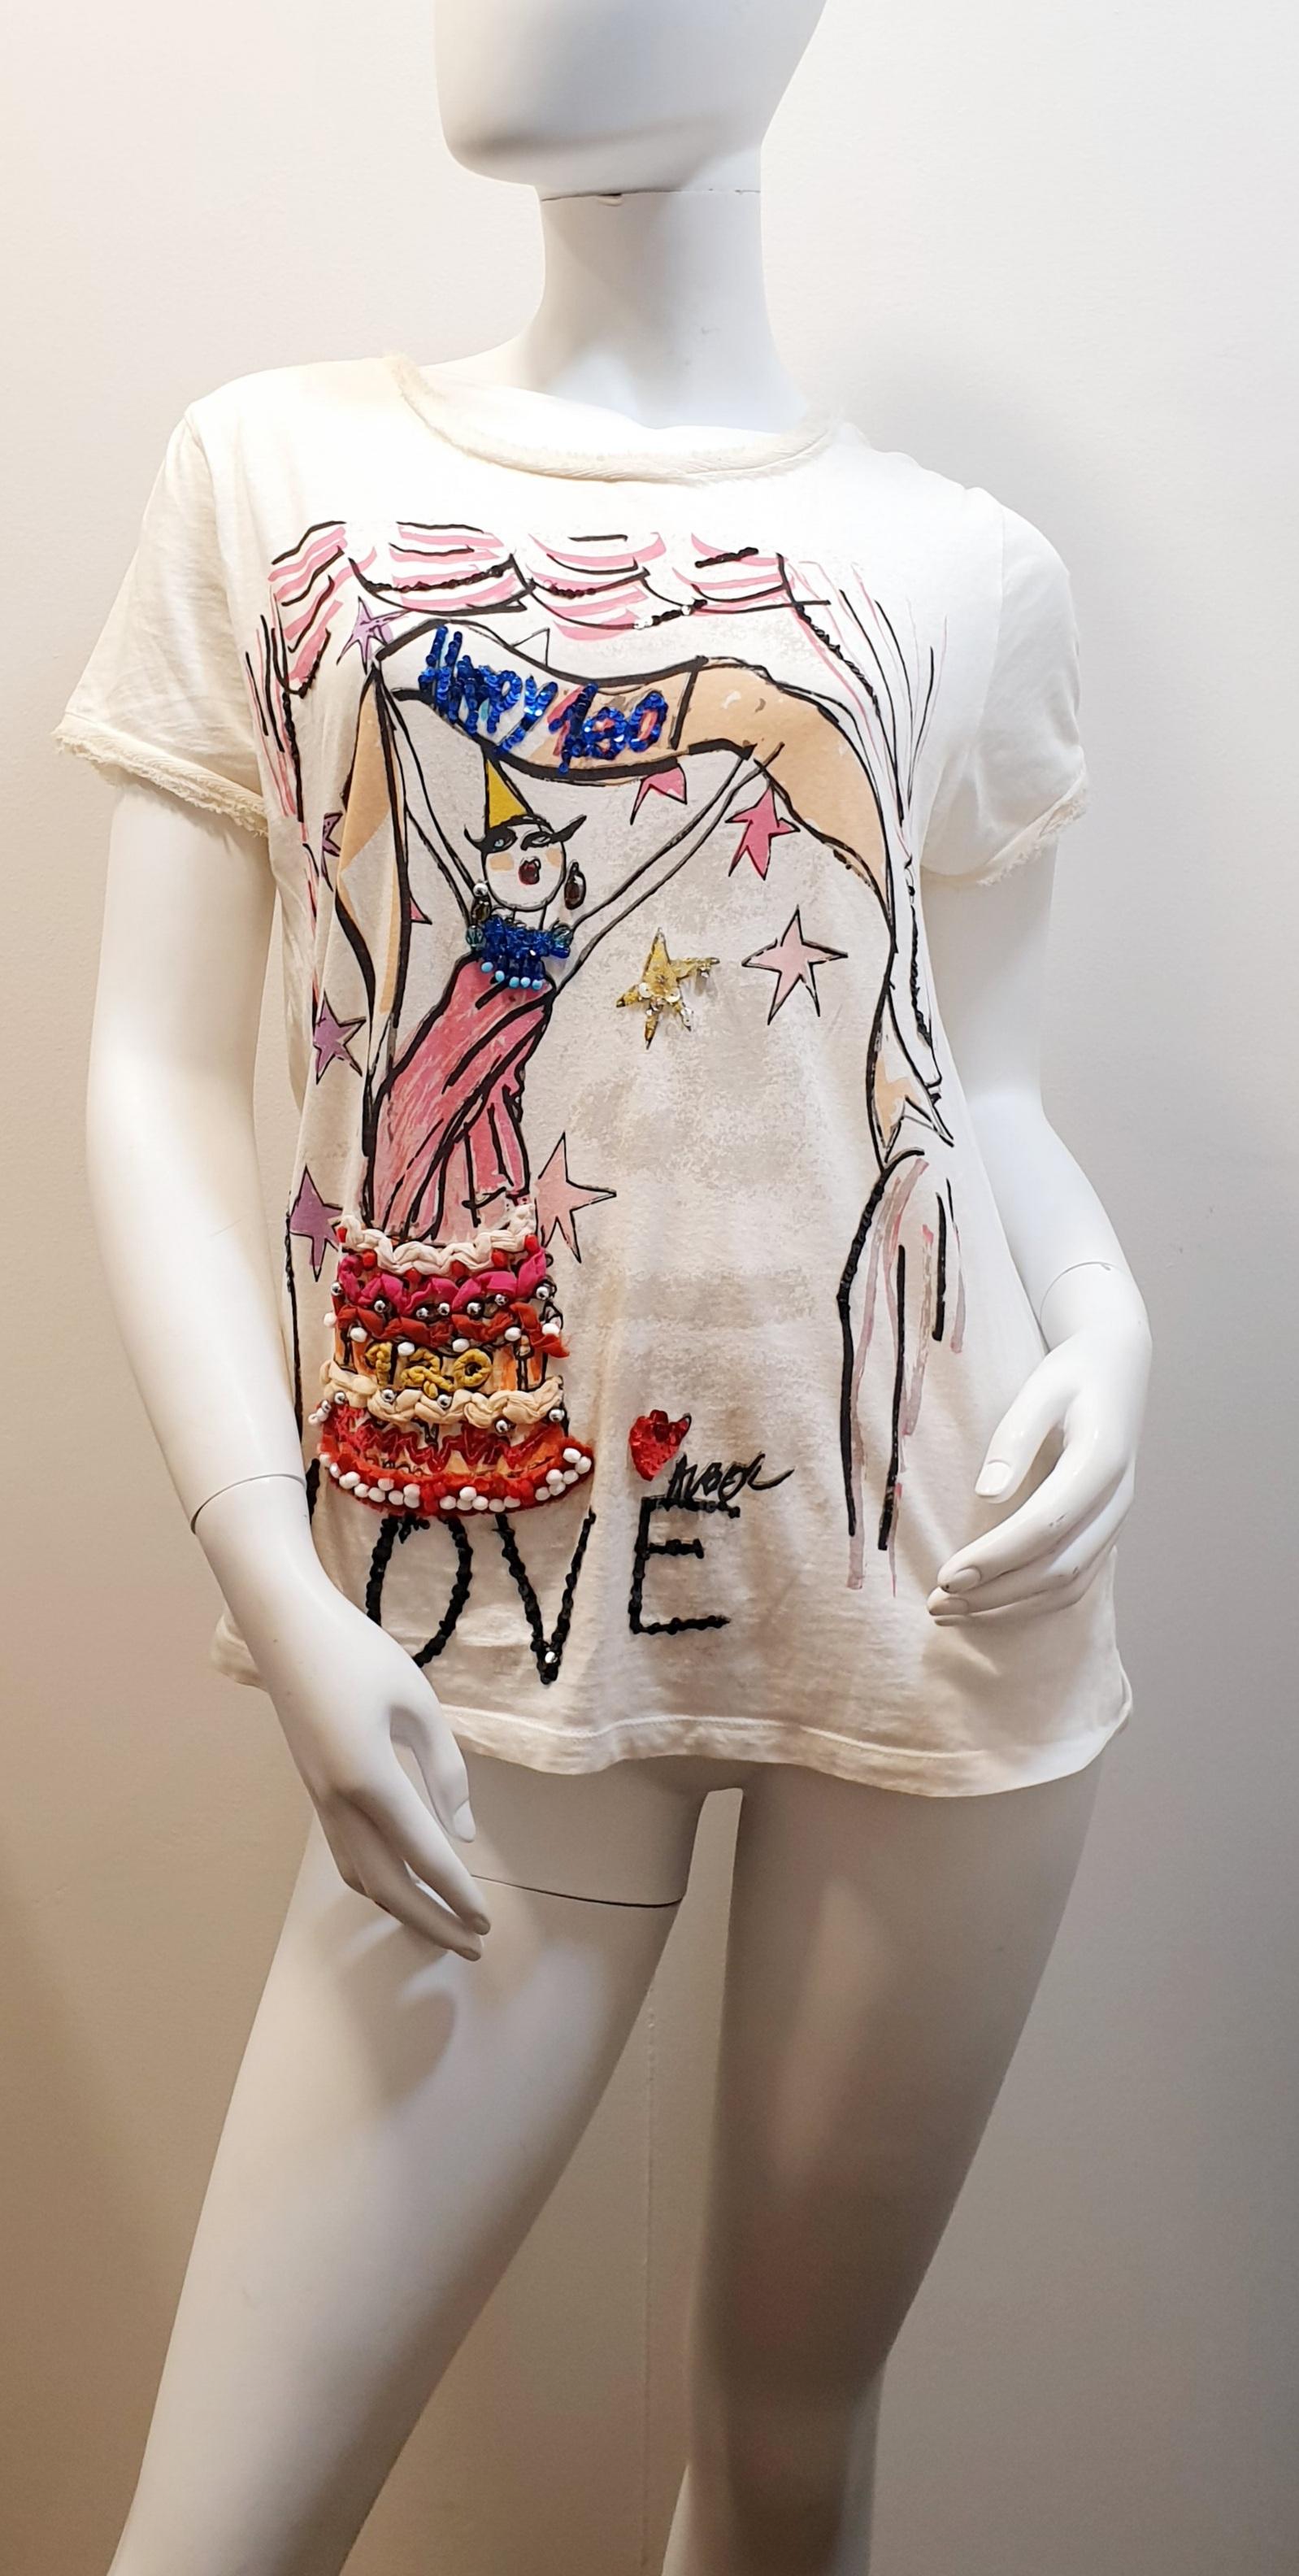 Iconic Lanvin 100 year anniversary limited edition t-shirt 
100% cotton
Size M

The Parisian house of Lanvin was created by Jeanne Lanvin and became one of the most influential design houses of the early Twentieth Century. The Lanvin look of